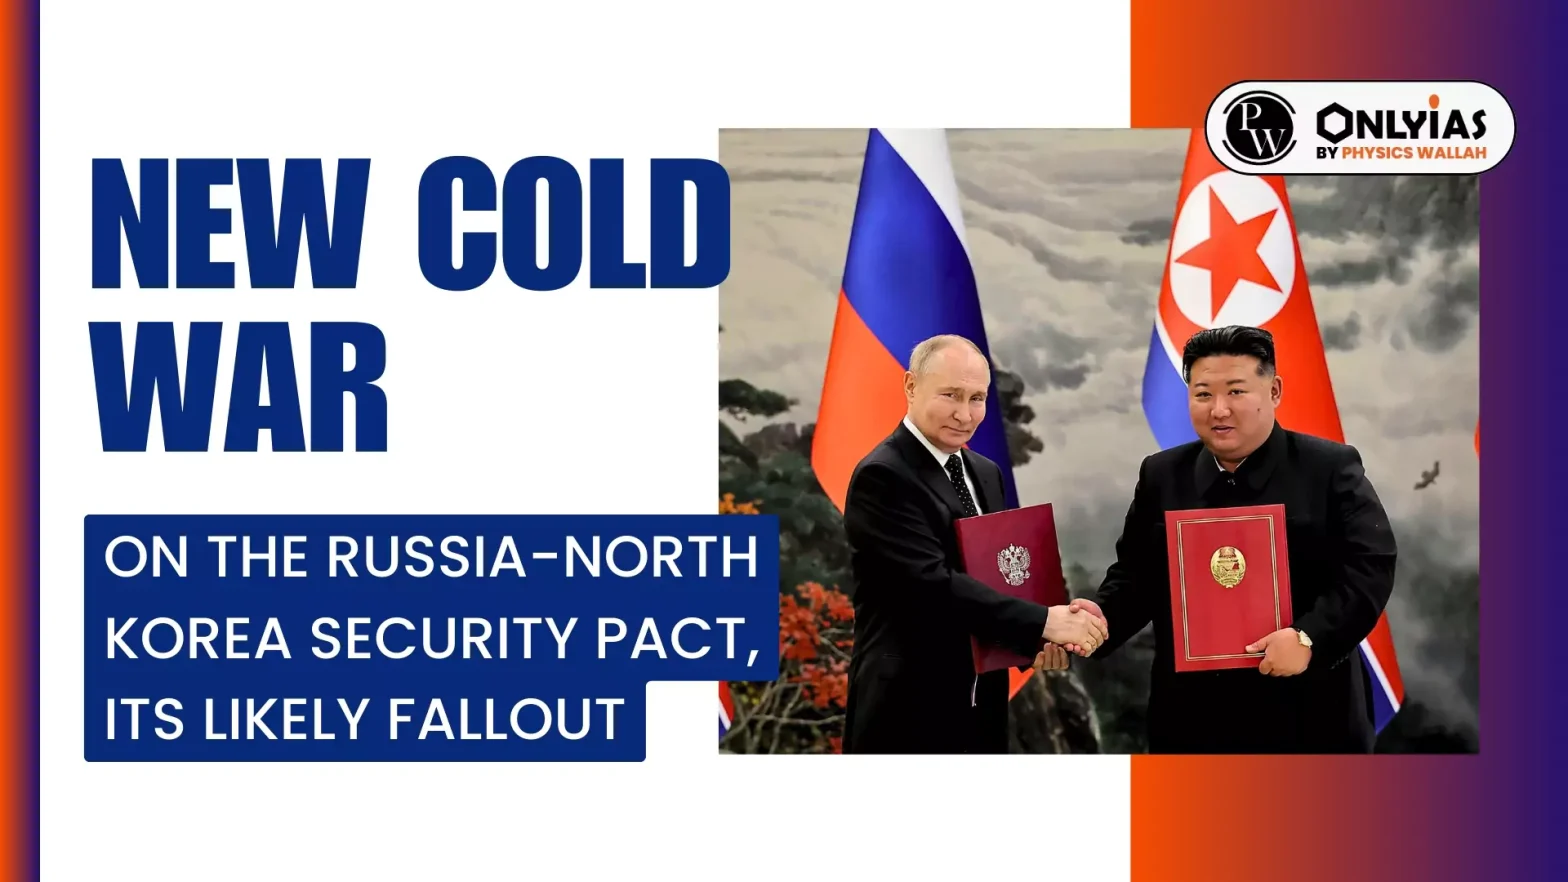 New Cold War: On the Russia-North Korea Security Pact, its Likely Fallout